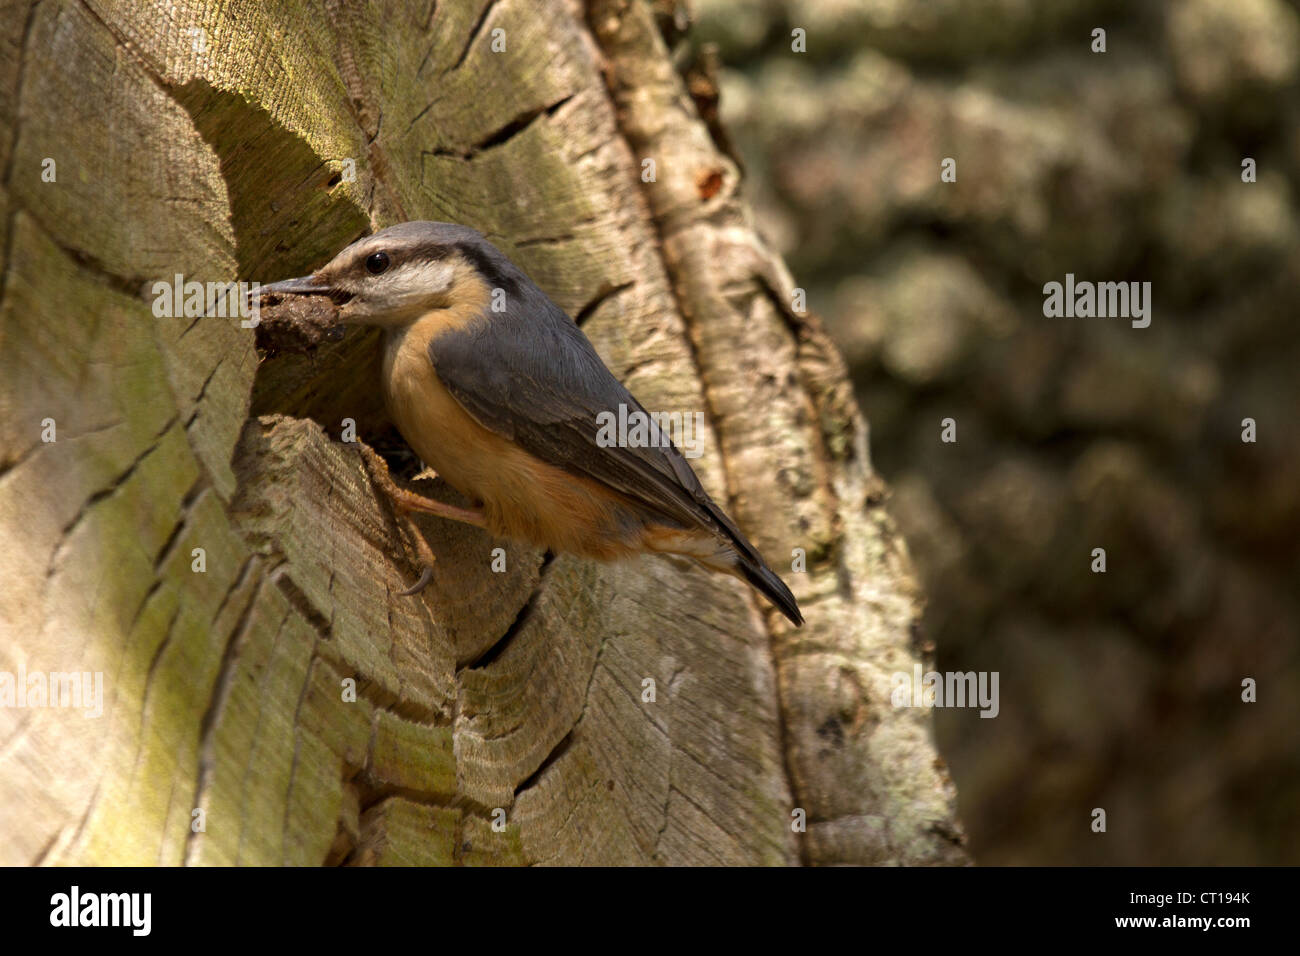 Nuthatch, Sitta europaea building its nest Stock Photo